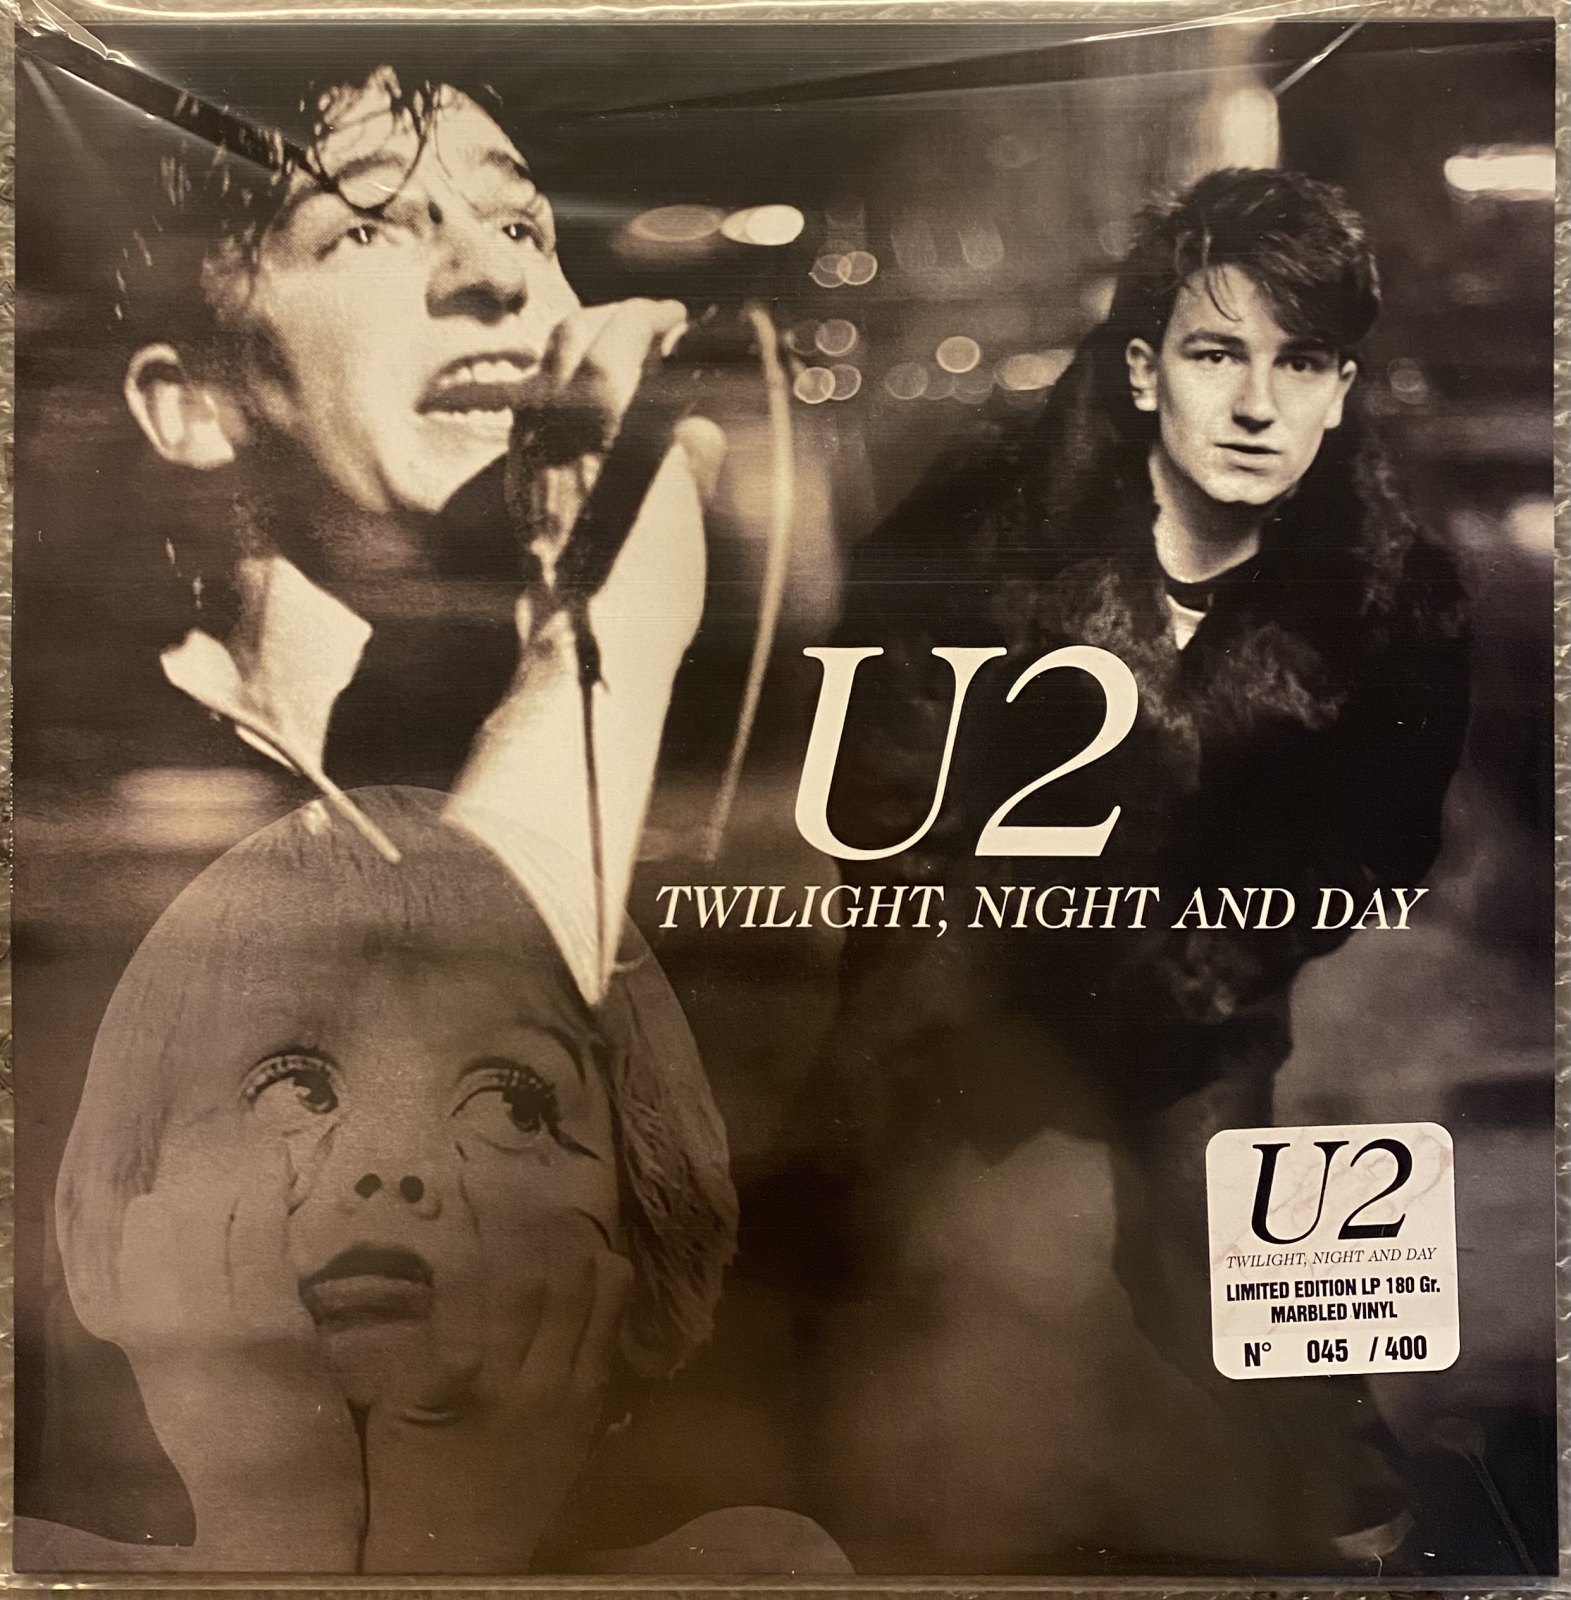 U2 - TWLIGHT, NIGHT AND DAY - COLORED AND NUMBERED